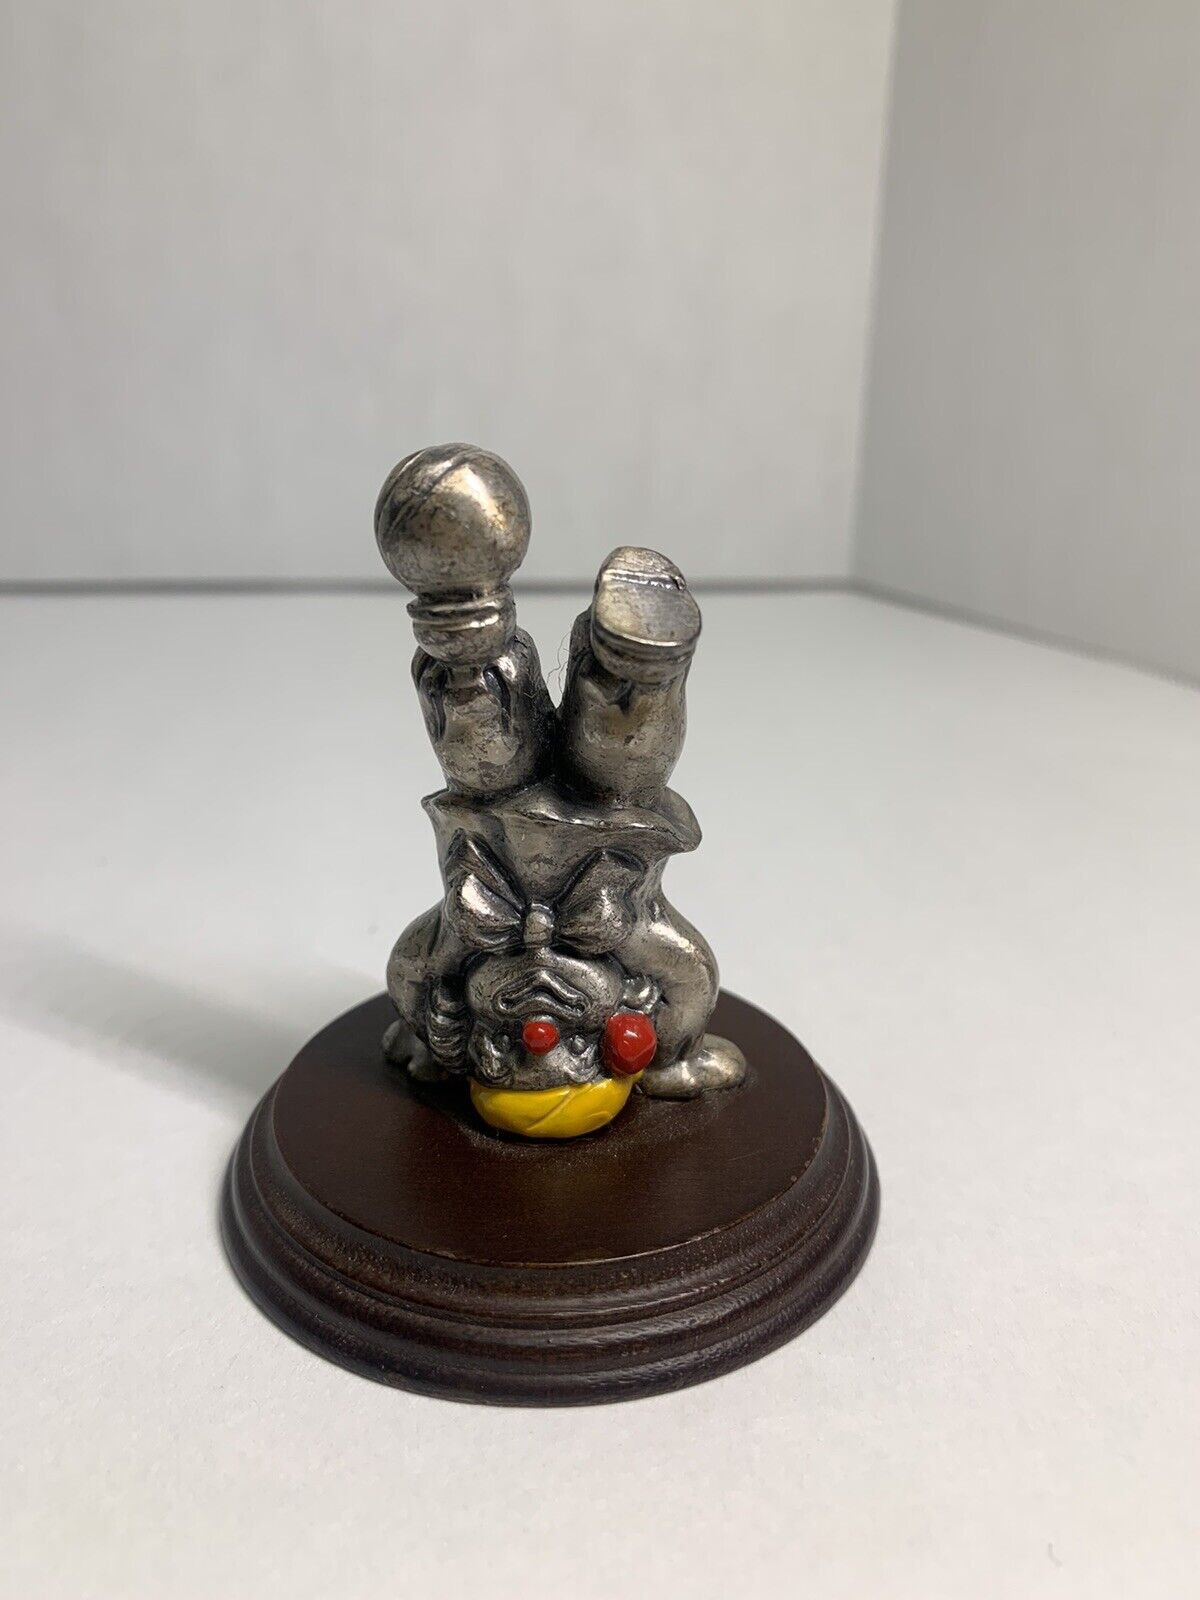 Vtg George Good Pewter Clown Figurines 3 Inch on Wood Base Yellow Hat With Ball